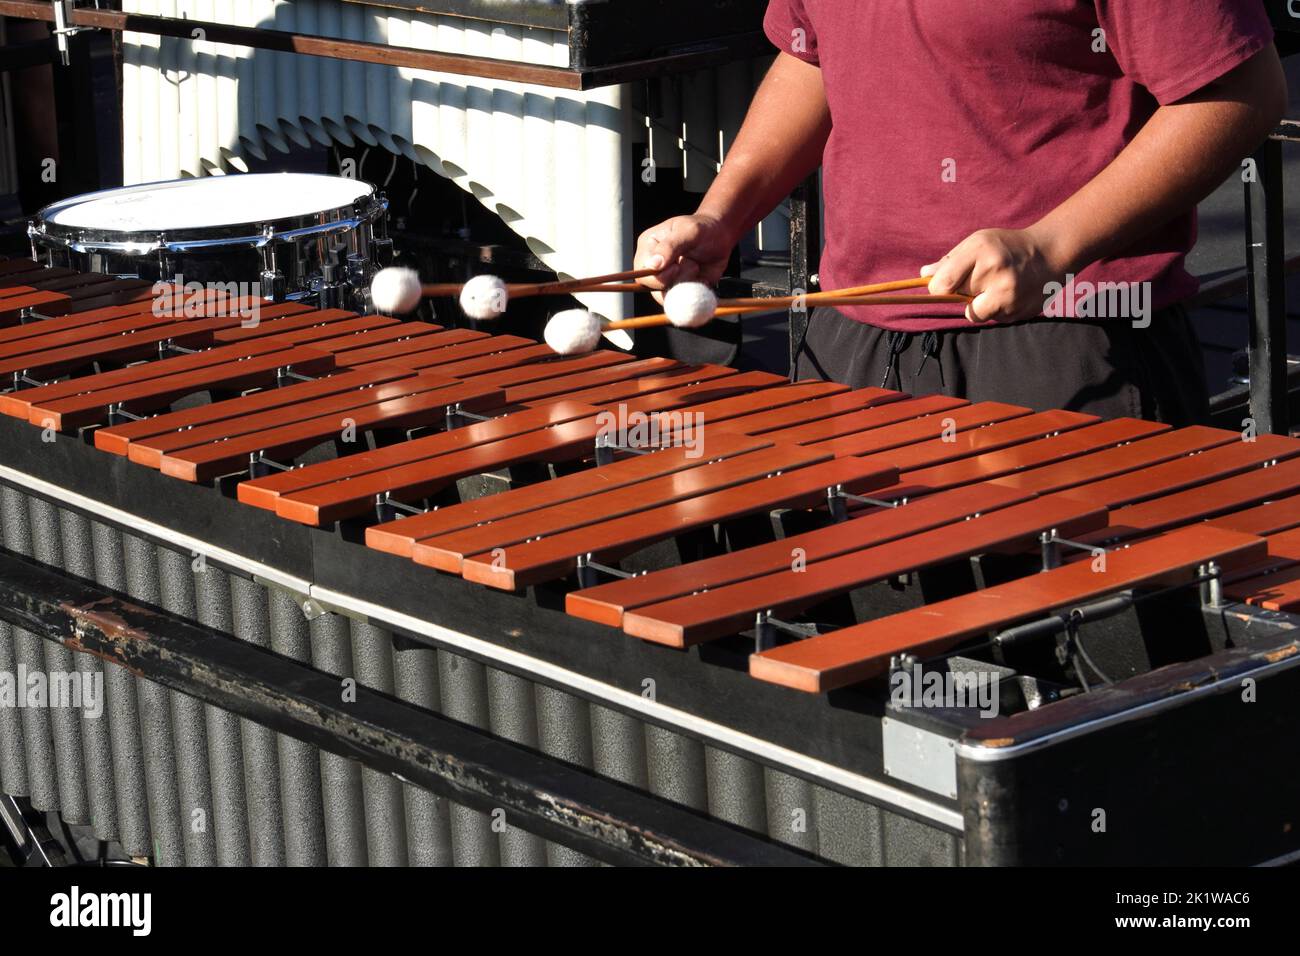 Hands of a musician playing a xylophone Stock Photo